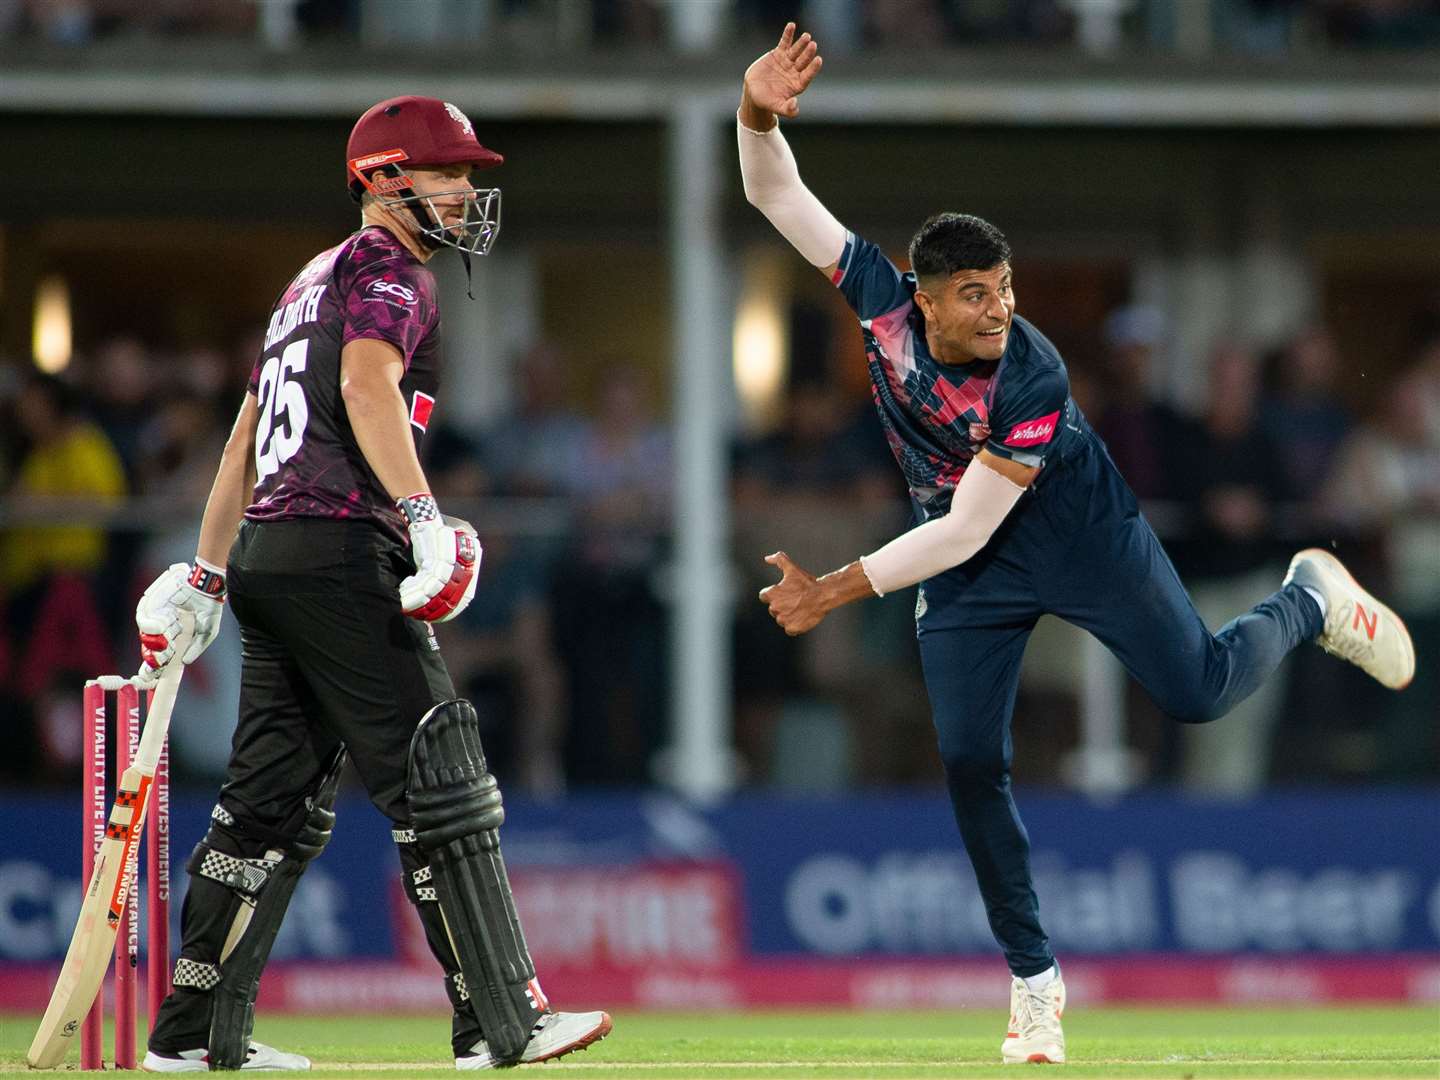 Kent spinner Imran Qayyum on his way to career-best T20 figures against Somerset. Picture: Ady Kerry